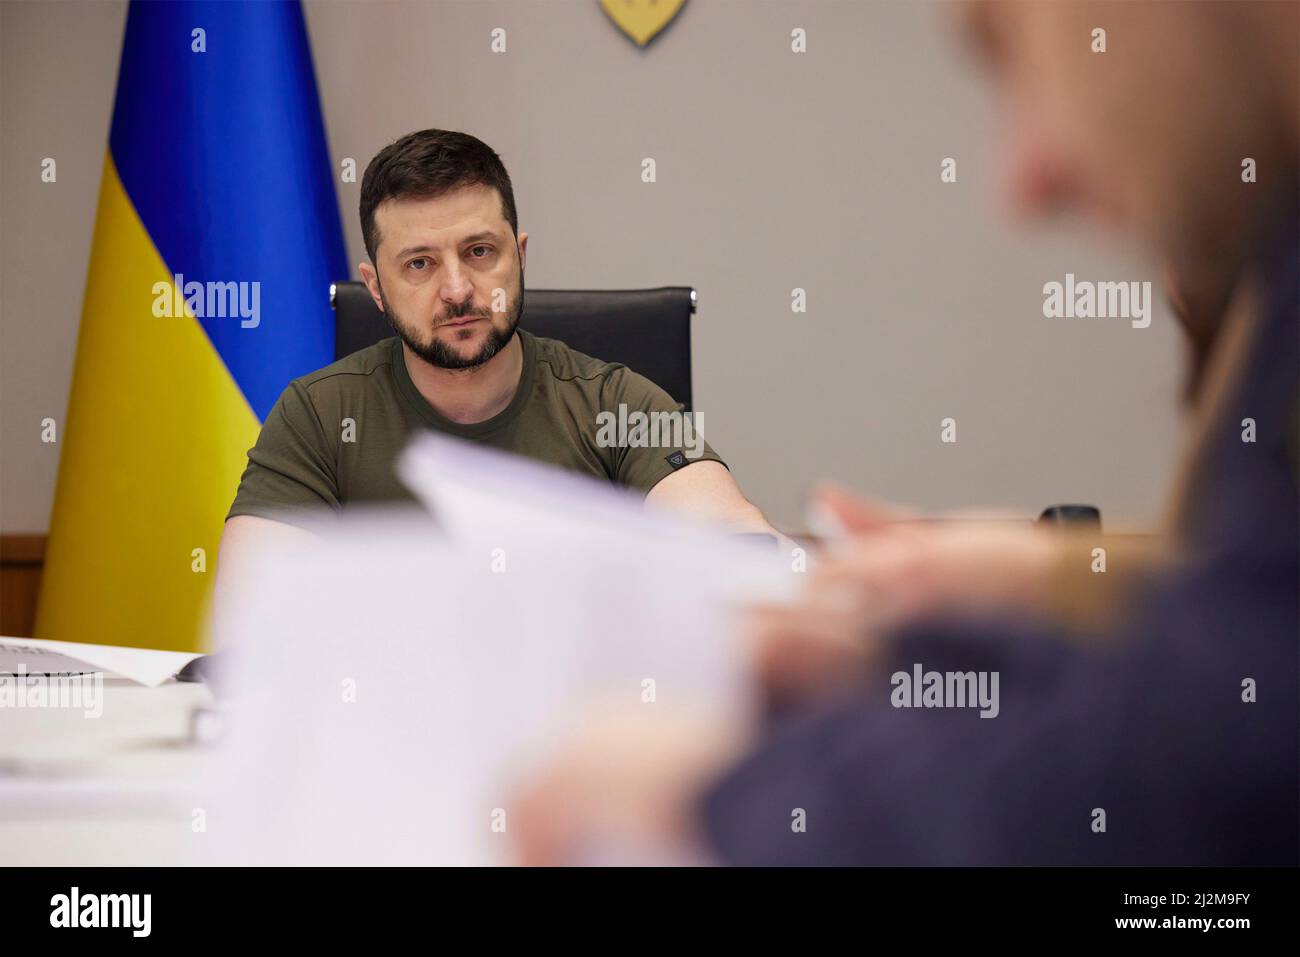 Kyiv, Ukraine. 02nd Apr, 2022. Ukrainian President Volodymyr Zelenskyy holds a meeting on the economy effects of the Russian invasion and rebuilding infrastructure, April 2, 2022 in Kyiv, Ukraine. Credit: Ukraine Presidency/Ukraine Presidency/Alamy Live News Stock Photo